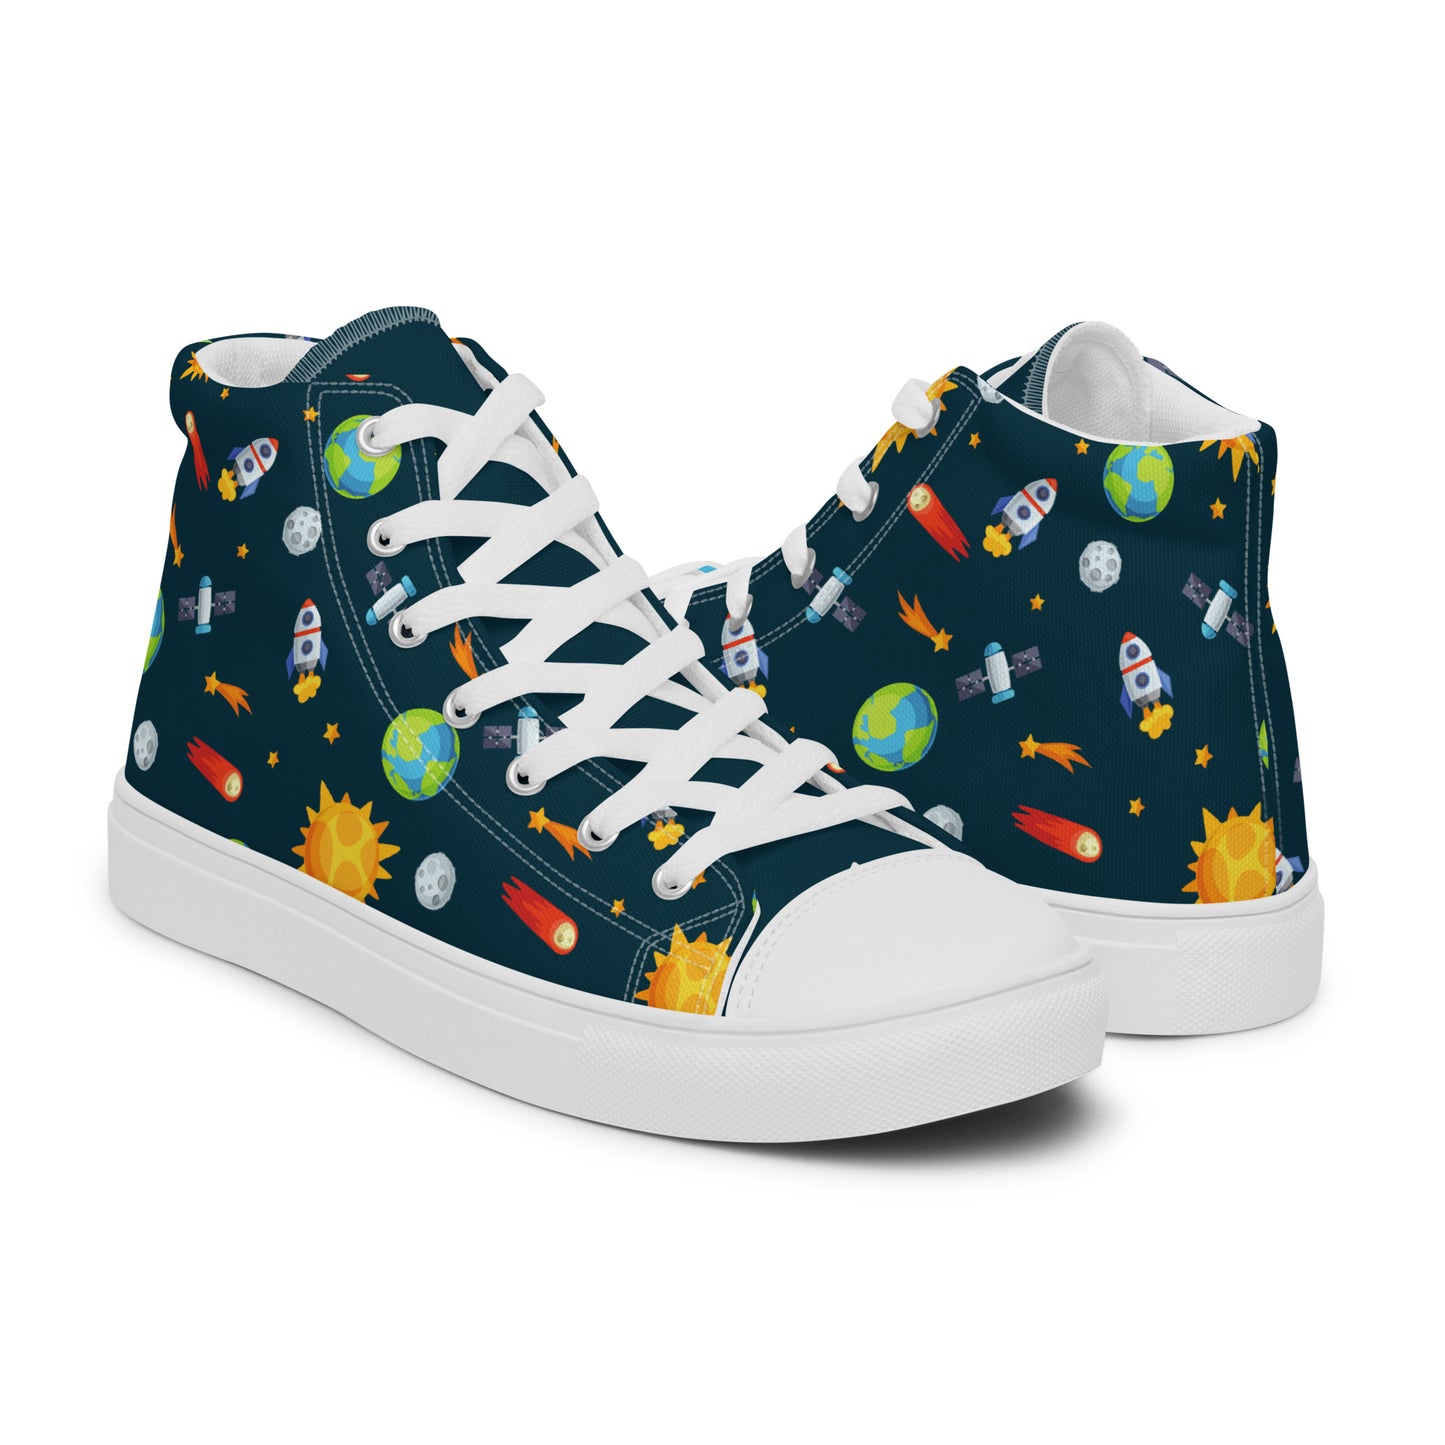 Busy Space - Women’s high top canvas shoes Womens High Top Shoes Outside Australia